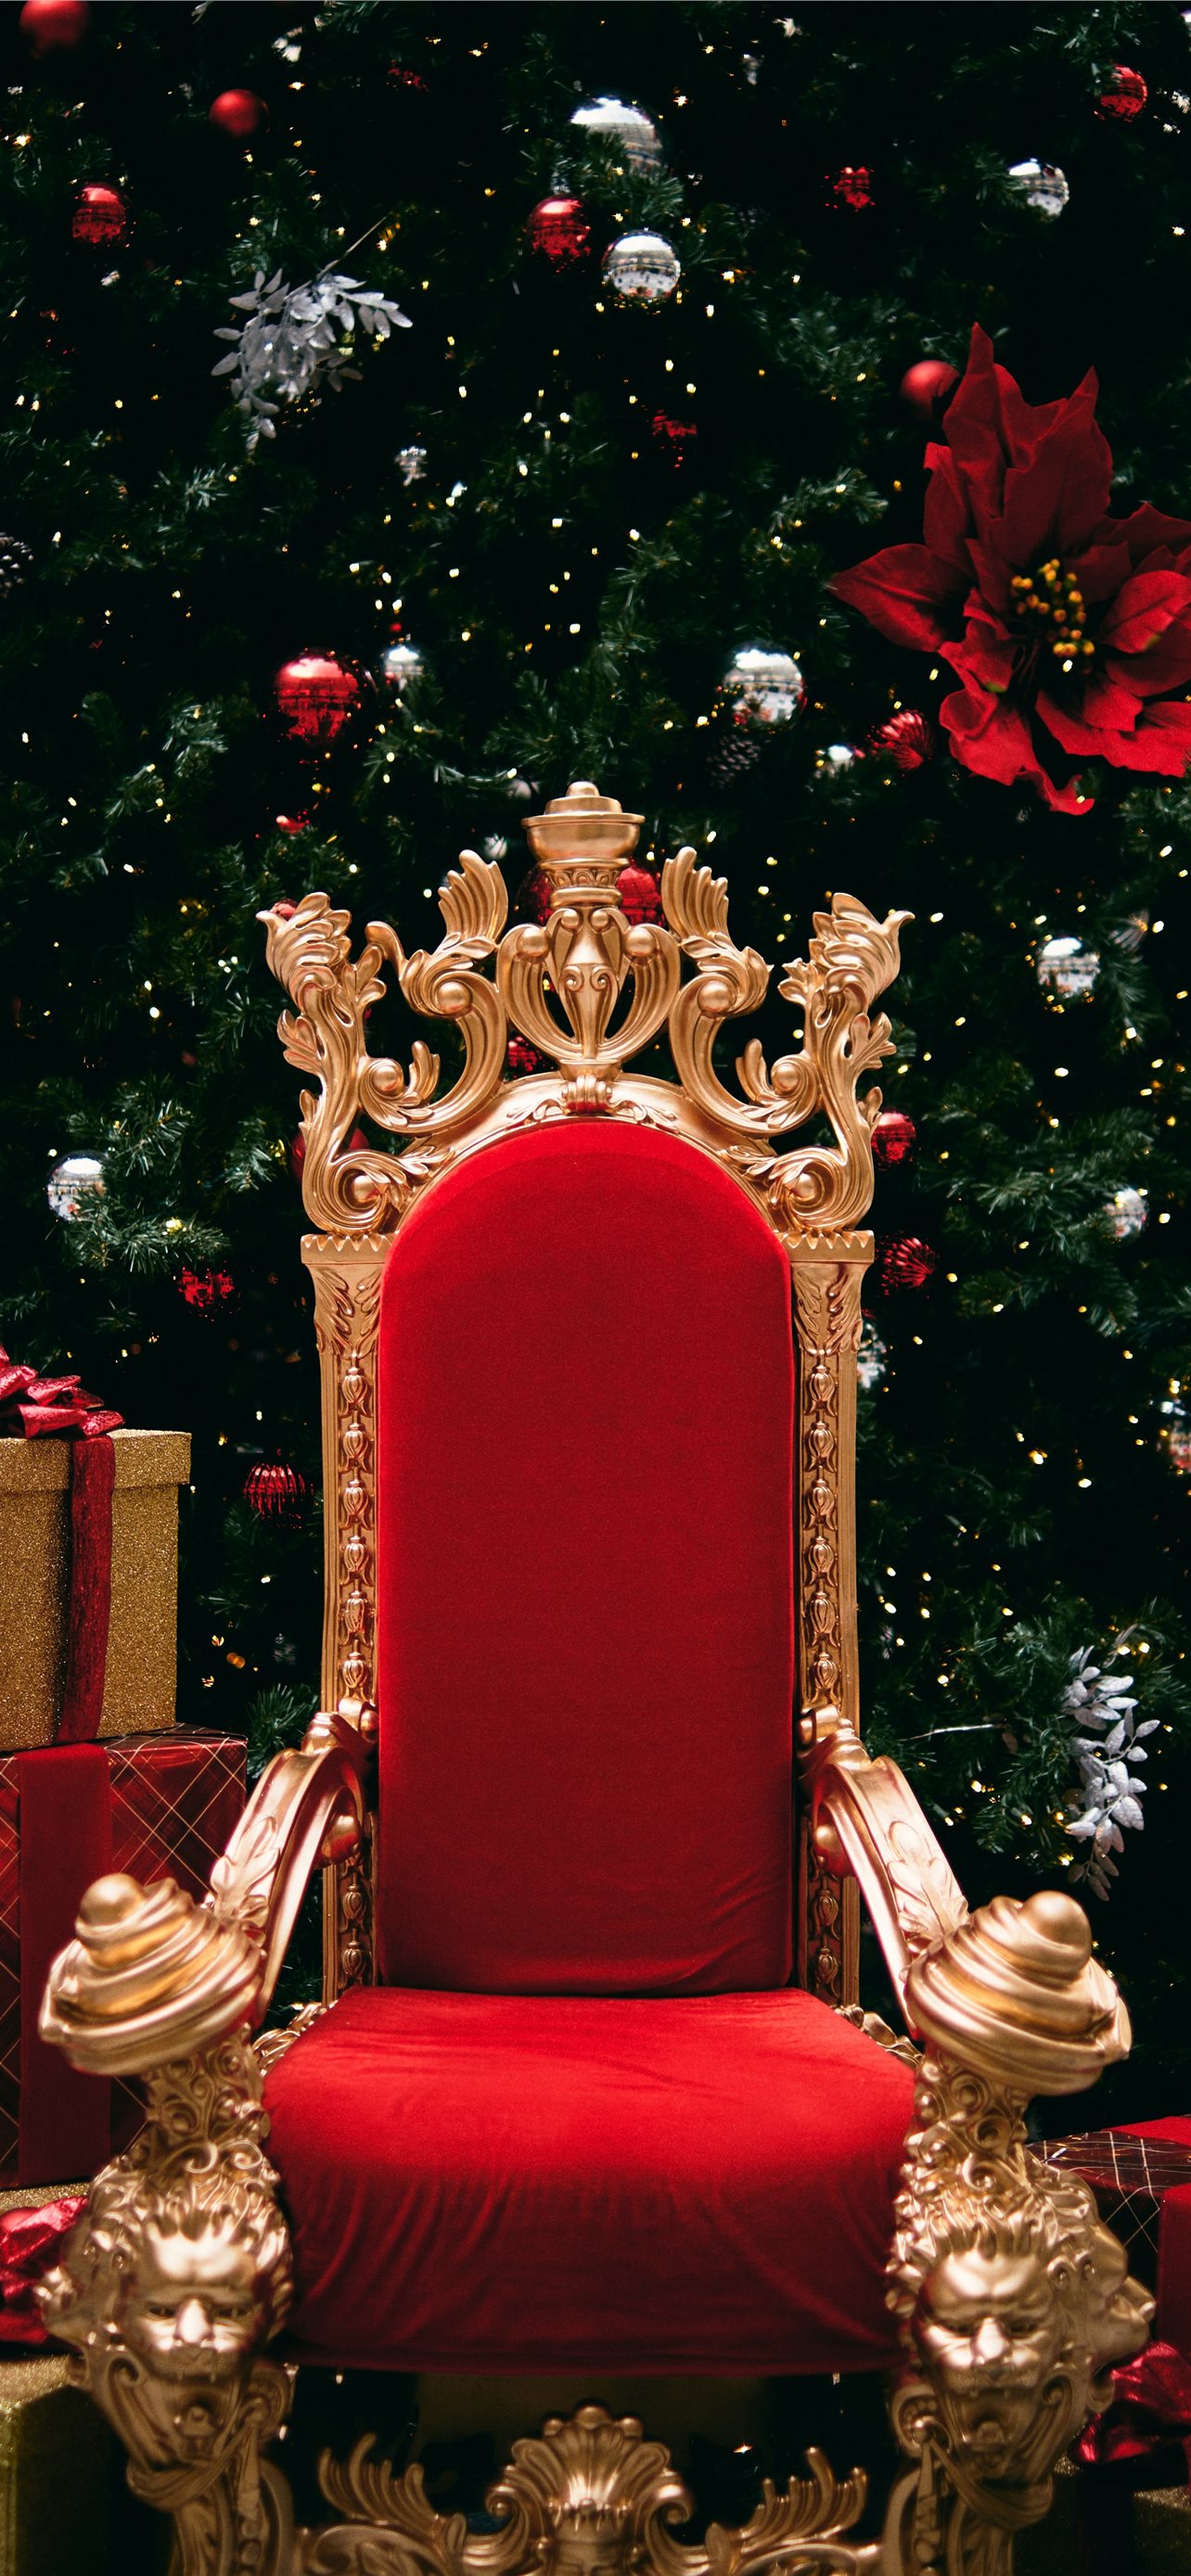 gold and red throne beside gift boxes iPhone wallpaper 